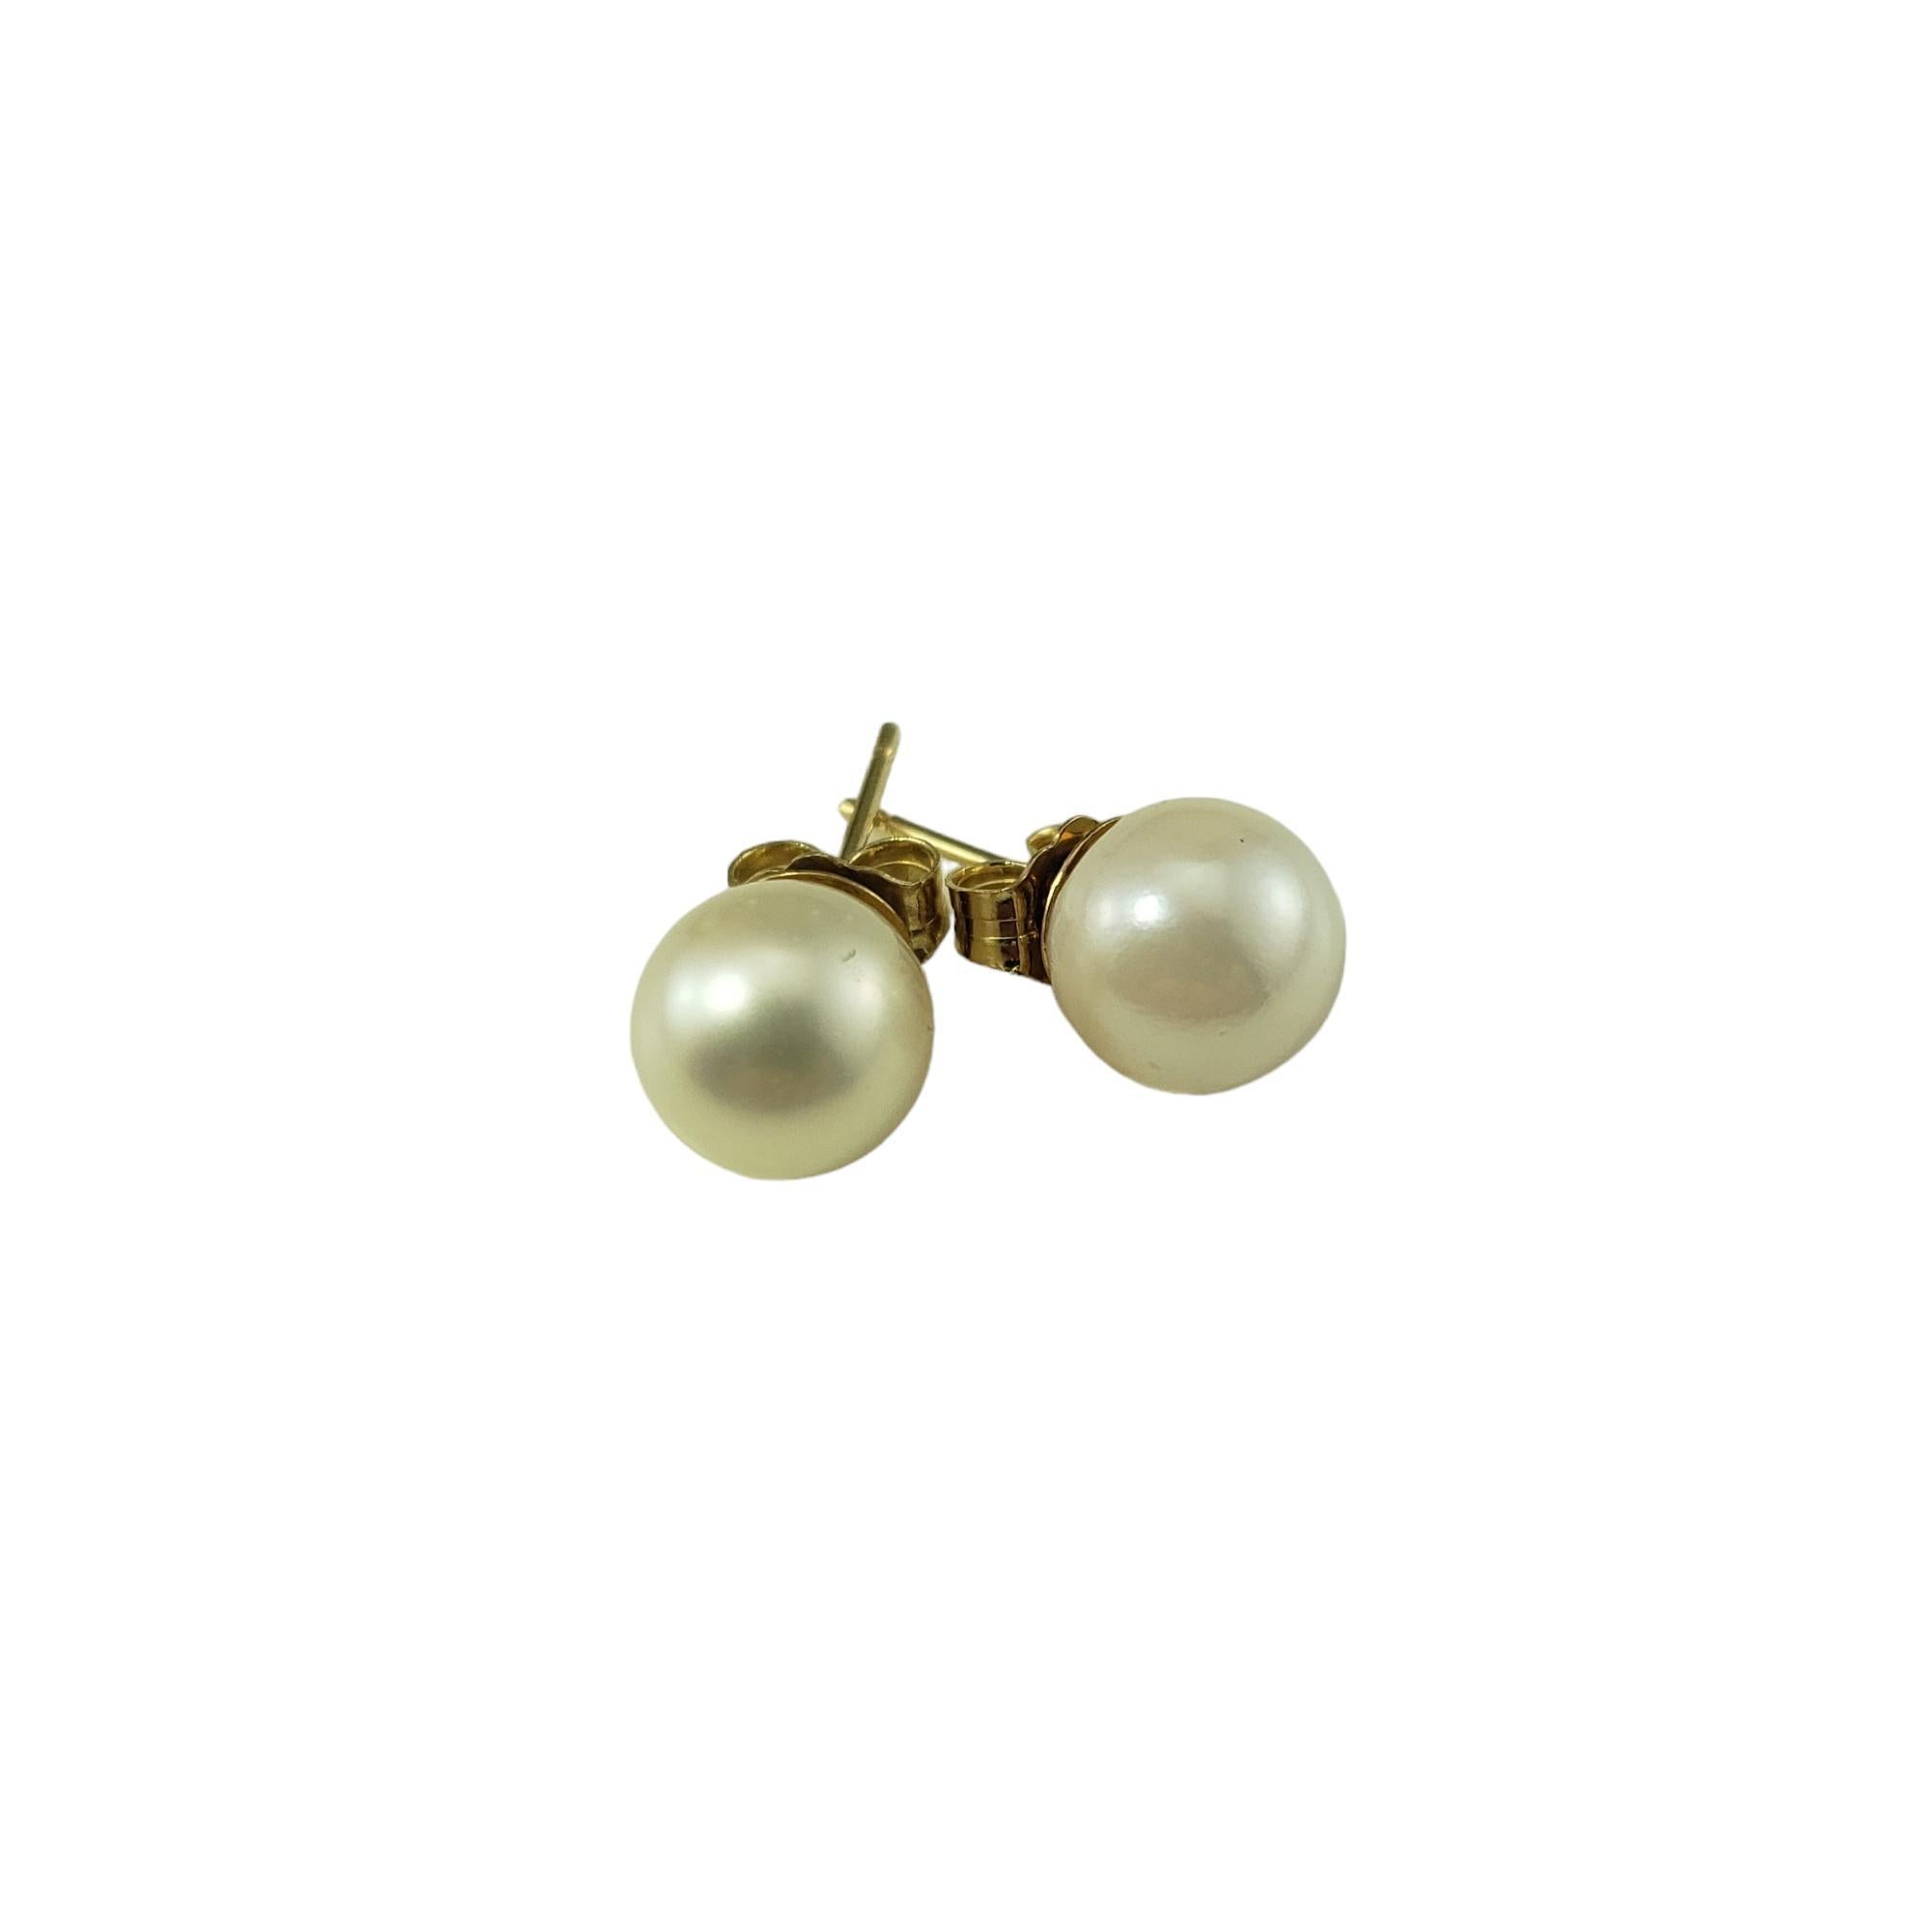 Vintage 14K Yellow Gold Pearl Stud Earrings-

These elegant stud earrings each feature one cultured pearl (7.5 mm) set in classic 14K yellow gold.  Push back closures.

Size: 7.5 mm

Stamped: 14K

Weight: 0.8 dwt. / 1.3 gr.

Very good condition,